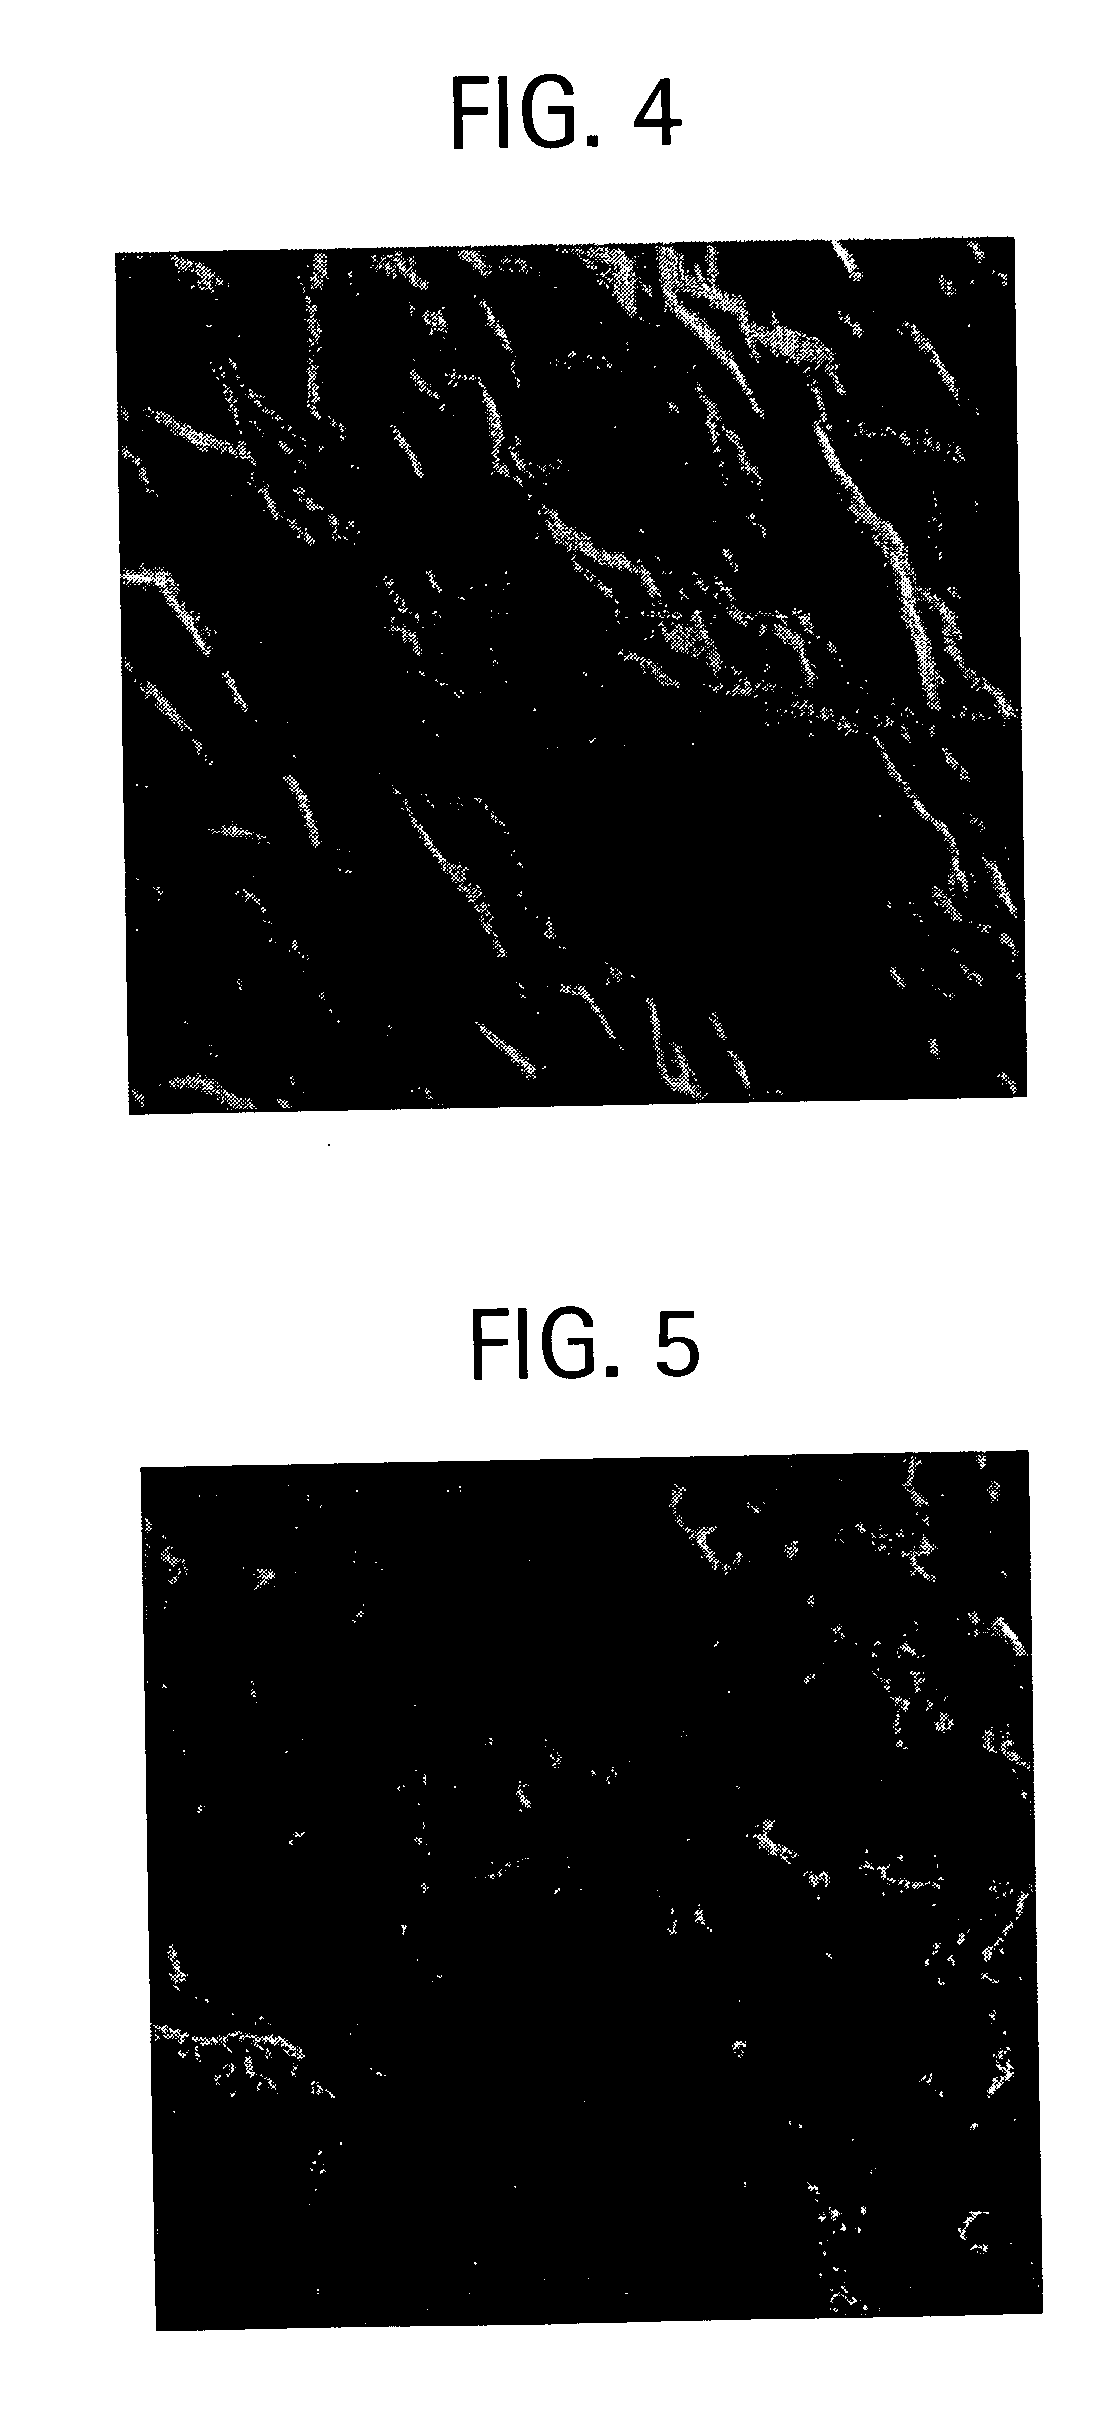 Composite refractory metal carbide coating on a substrate and method for making thereof